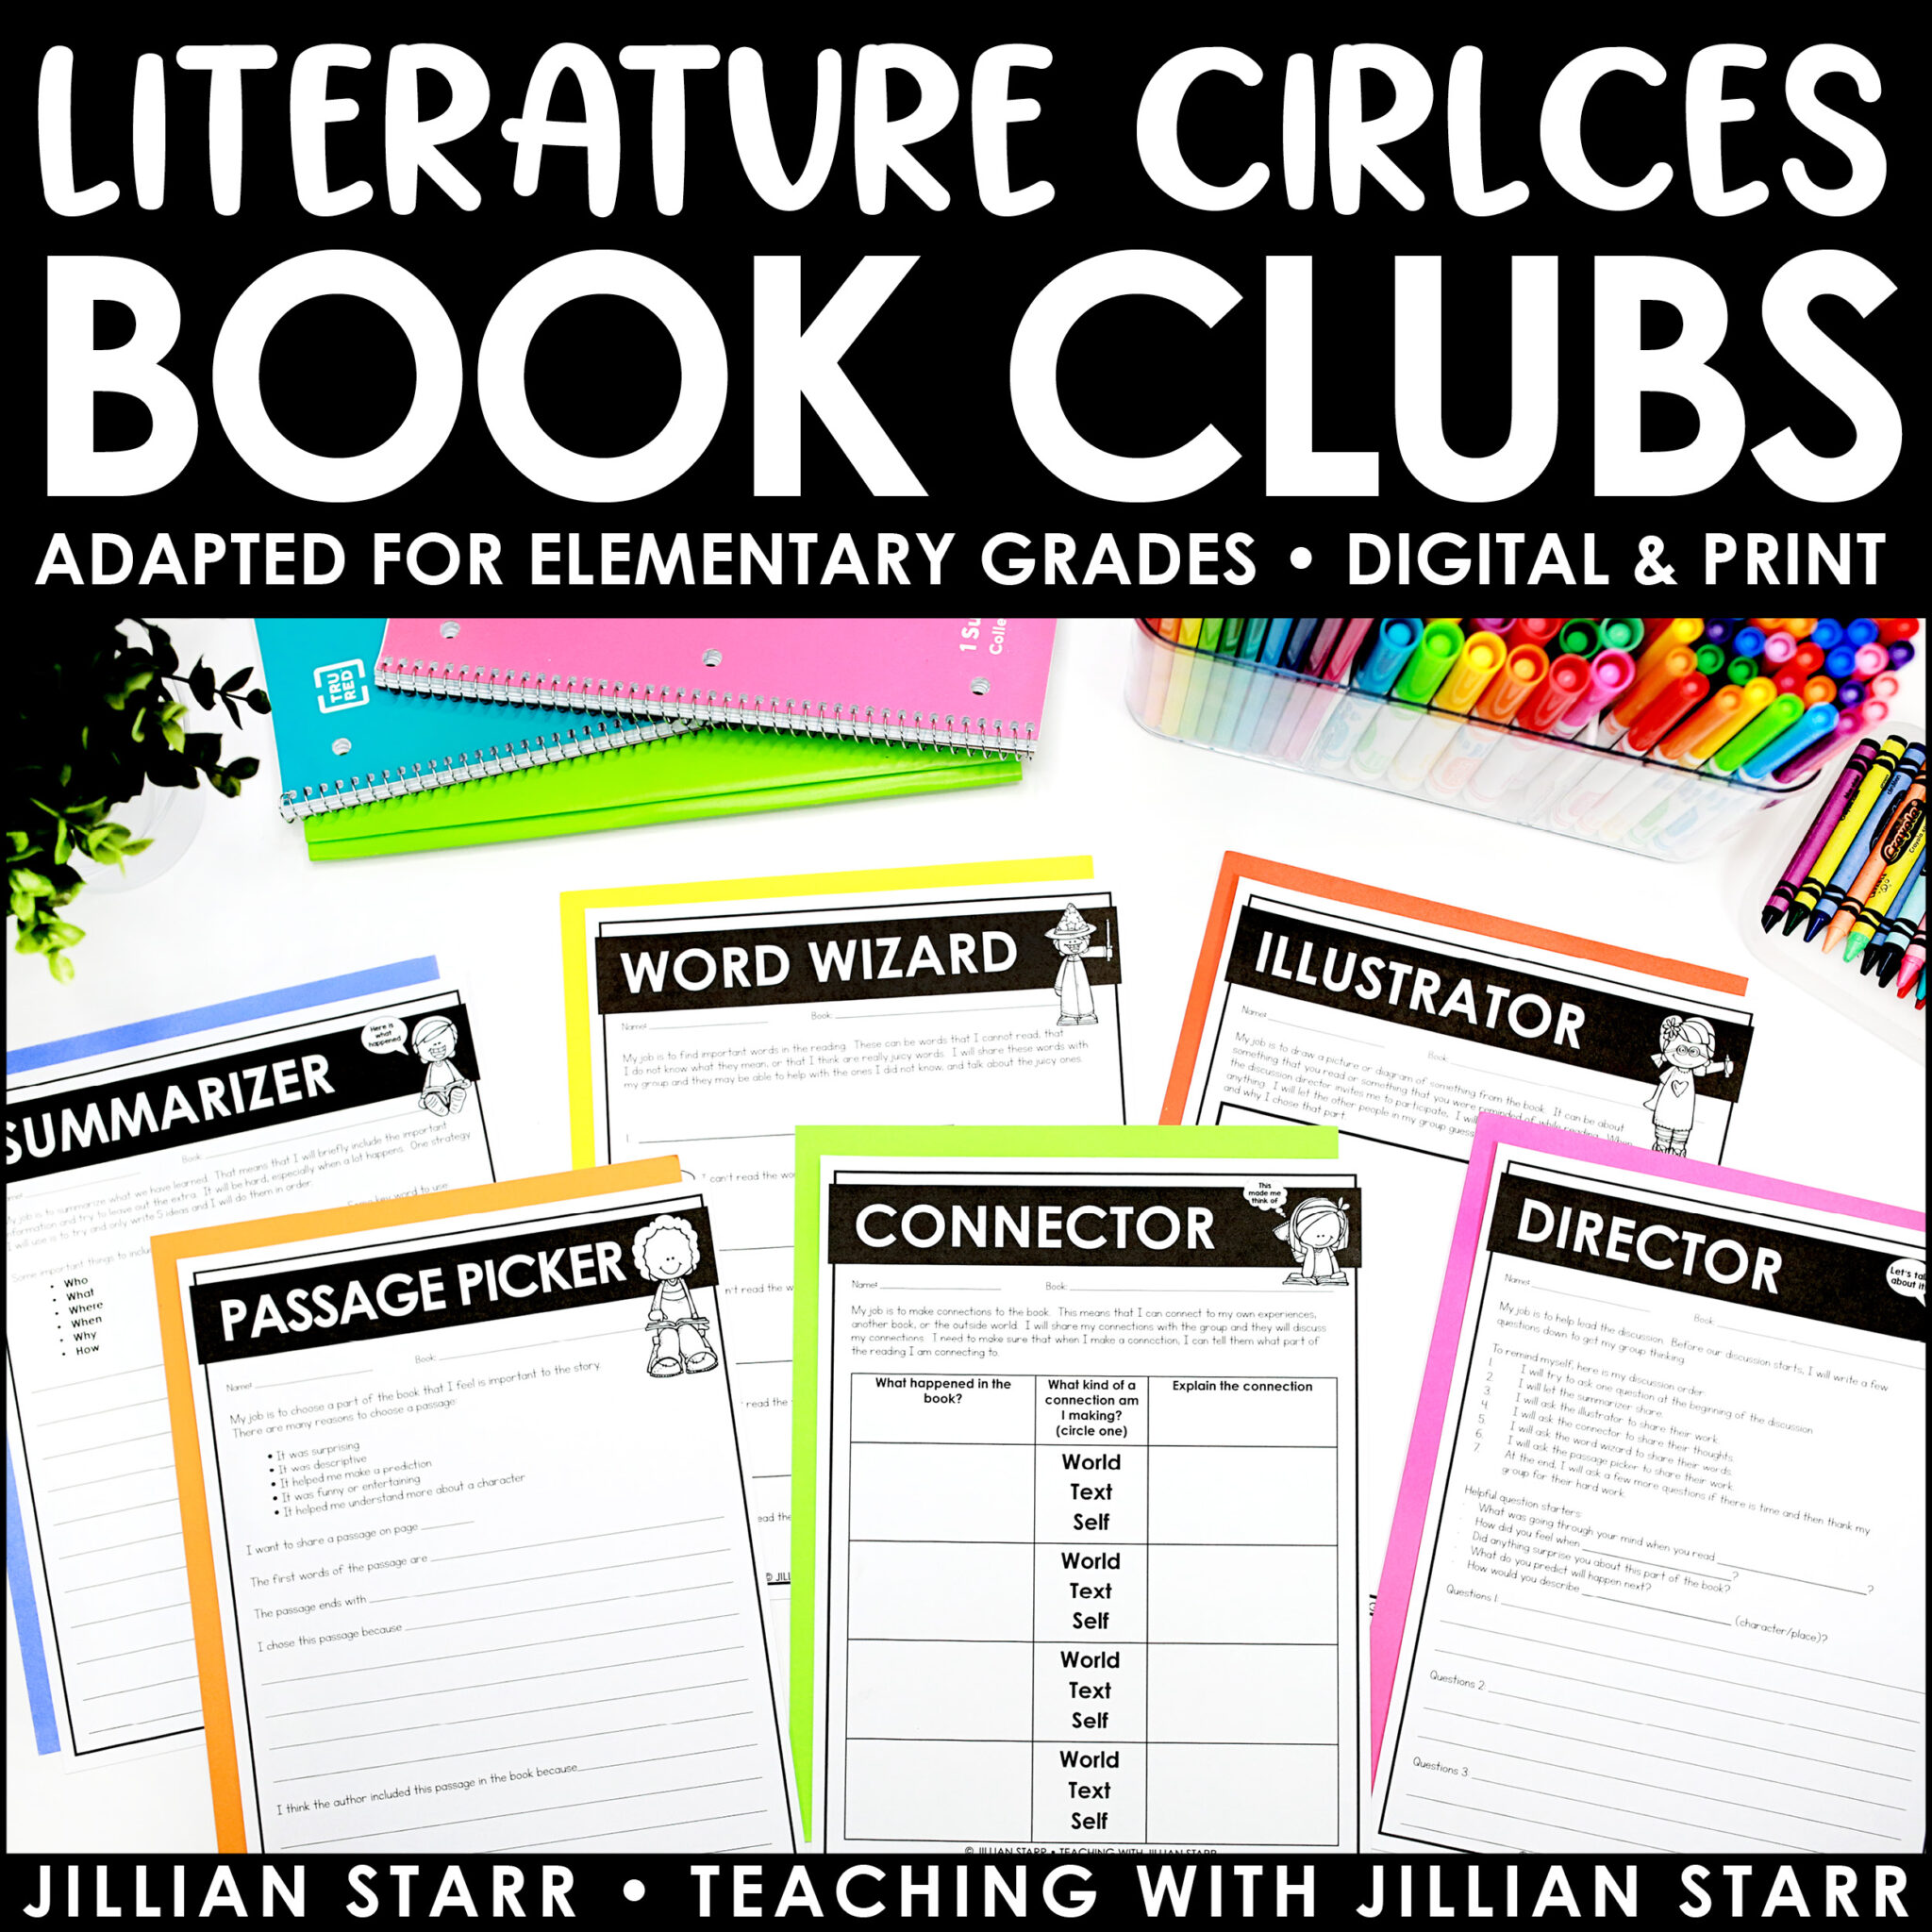 5-reasons-to-try-literature-circles-in-your-classroom-tomorrow